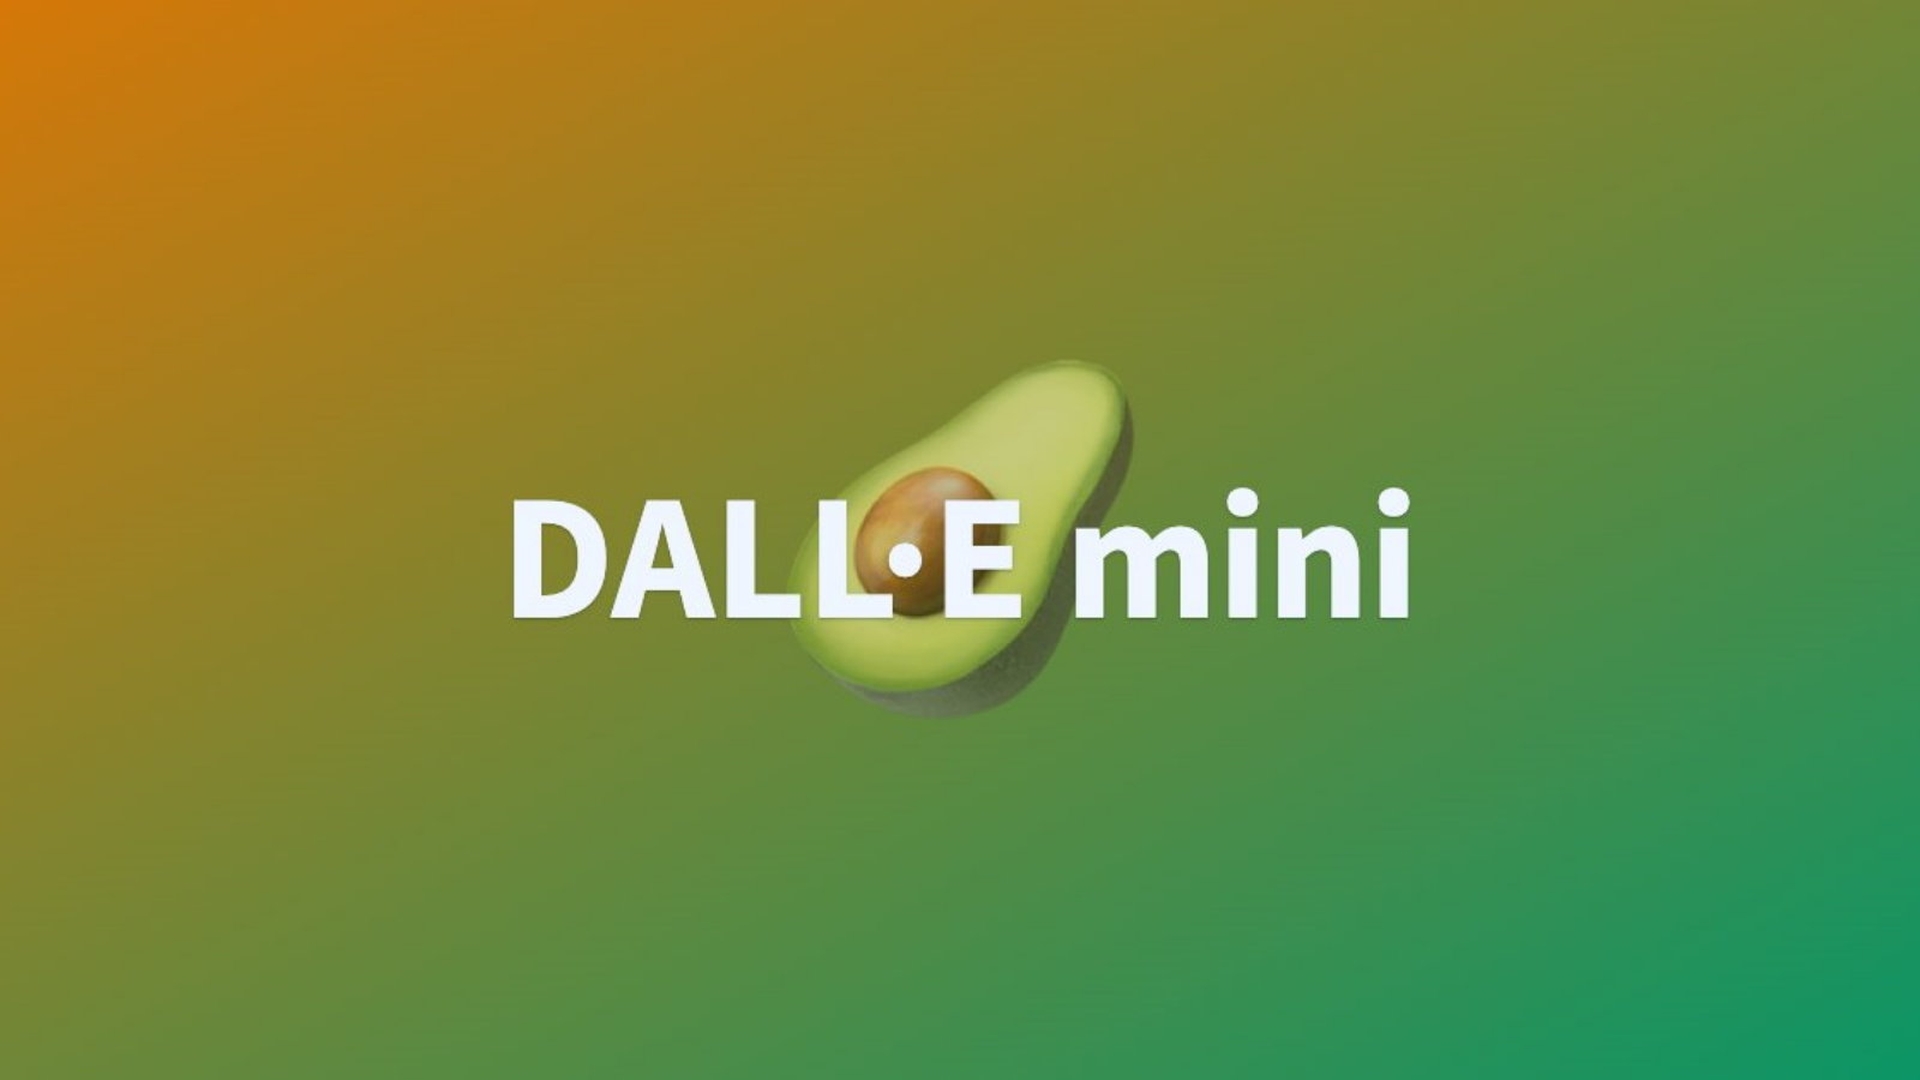 Today, we are covering how long does DallE Mini take, as there are many who see Dall E mini too much traffic error while taking part in this AI image generator meme.